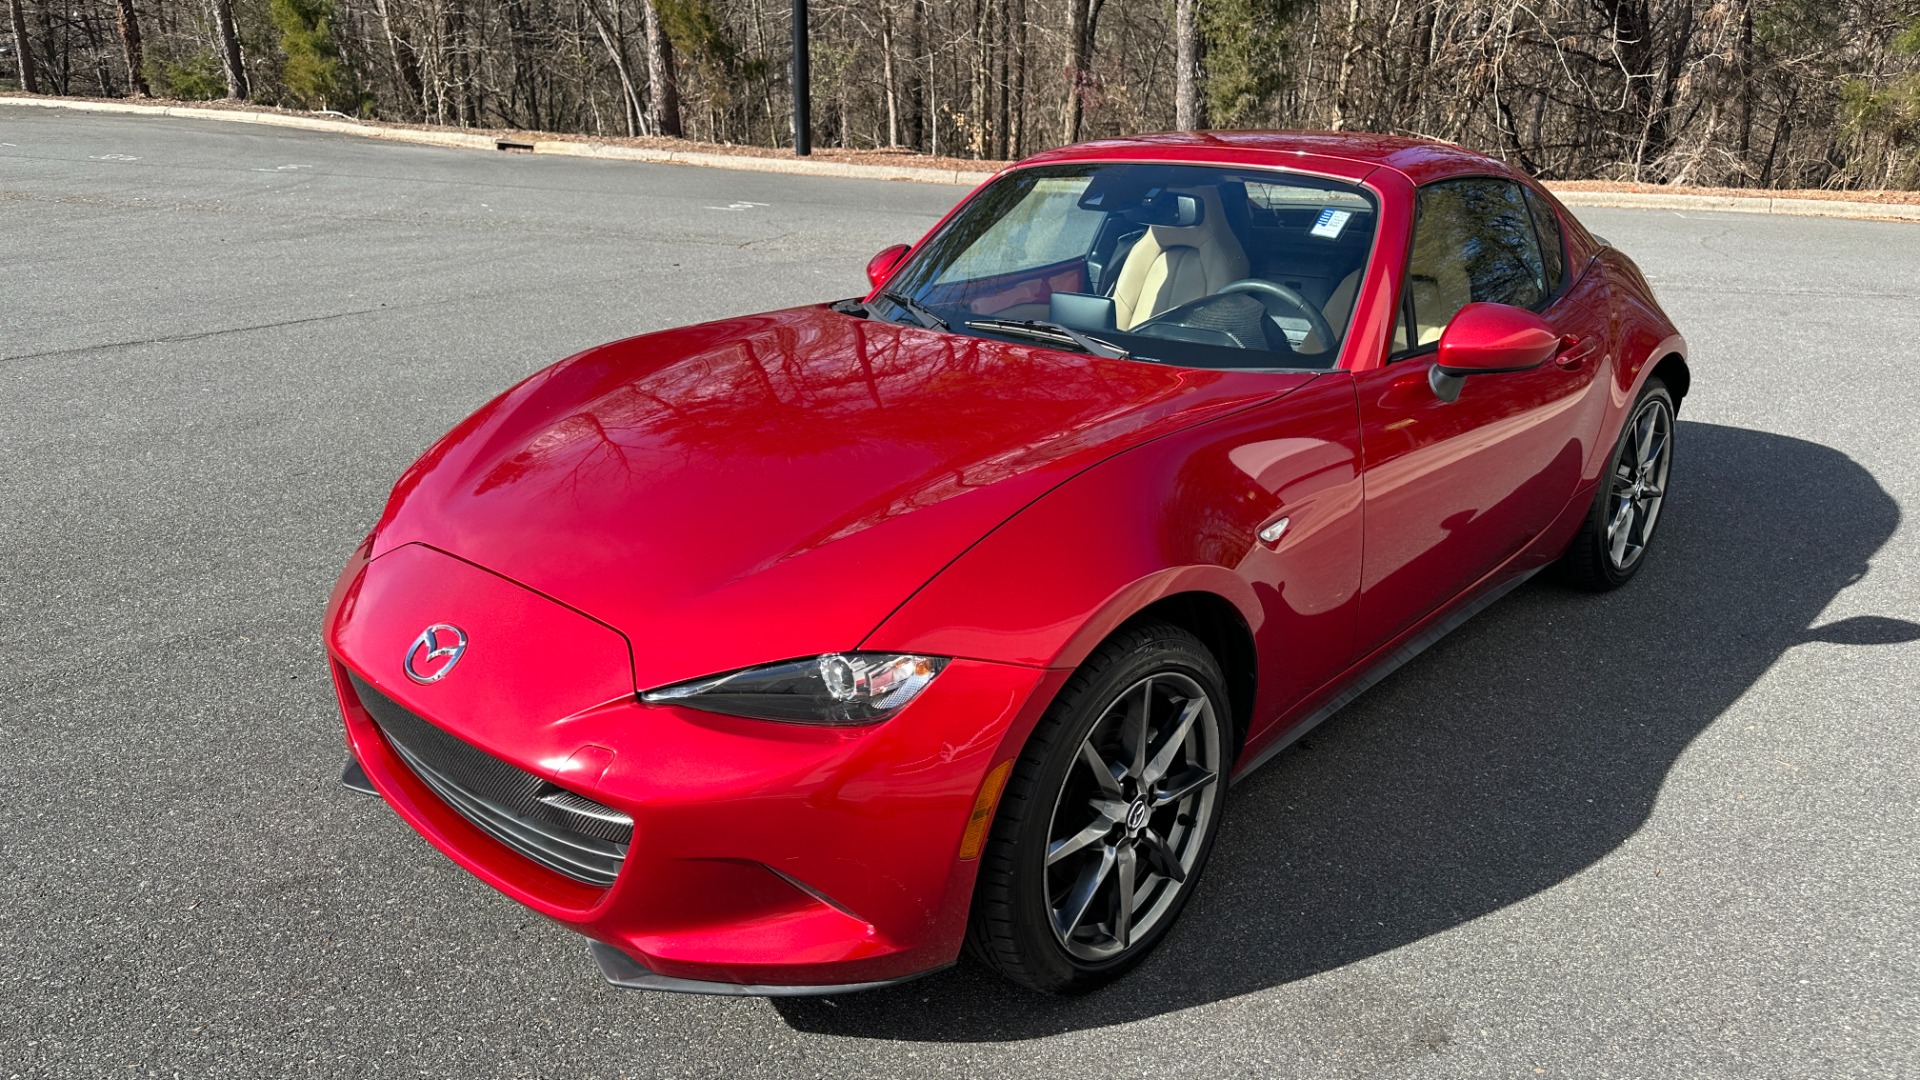 Used 2017 Mazda MX-5 Miata RF GRAND TOURING / POWER HARD TOP CONVERTIBLE / AUTOMATIC for sale $22,995 at Formula Imports in Charlotte NC 28227 9